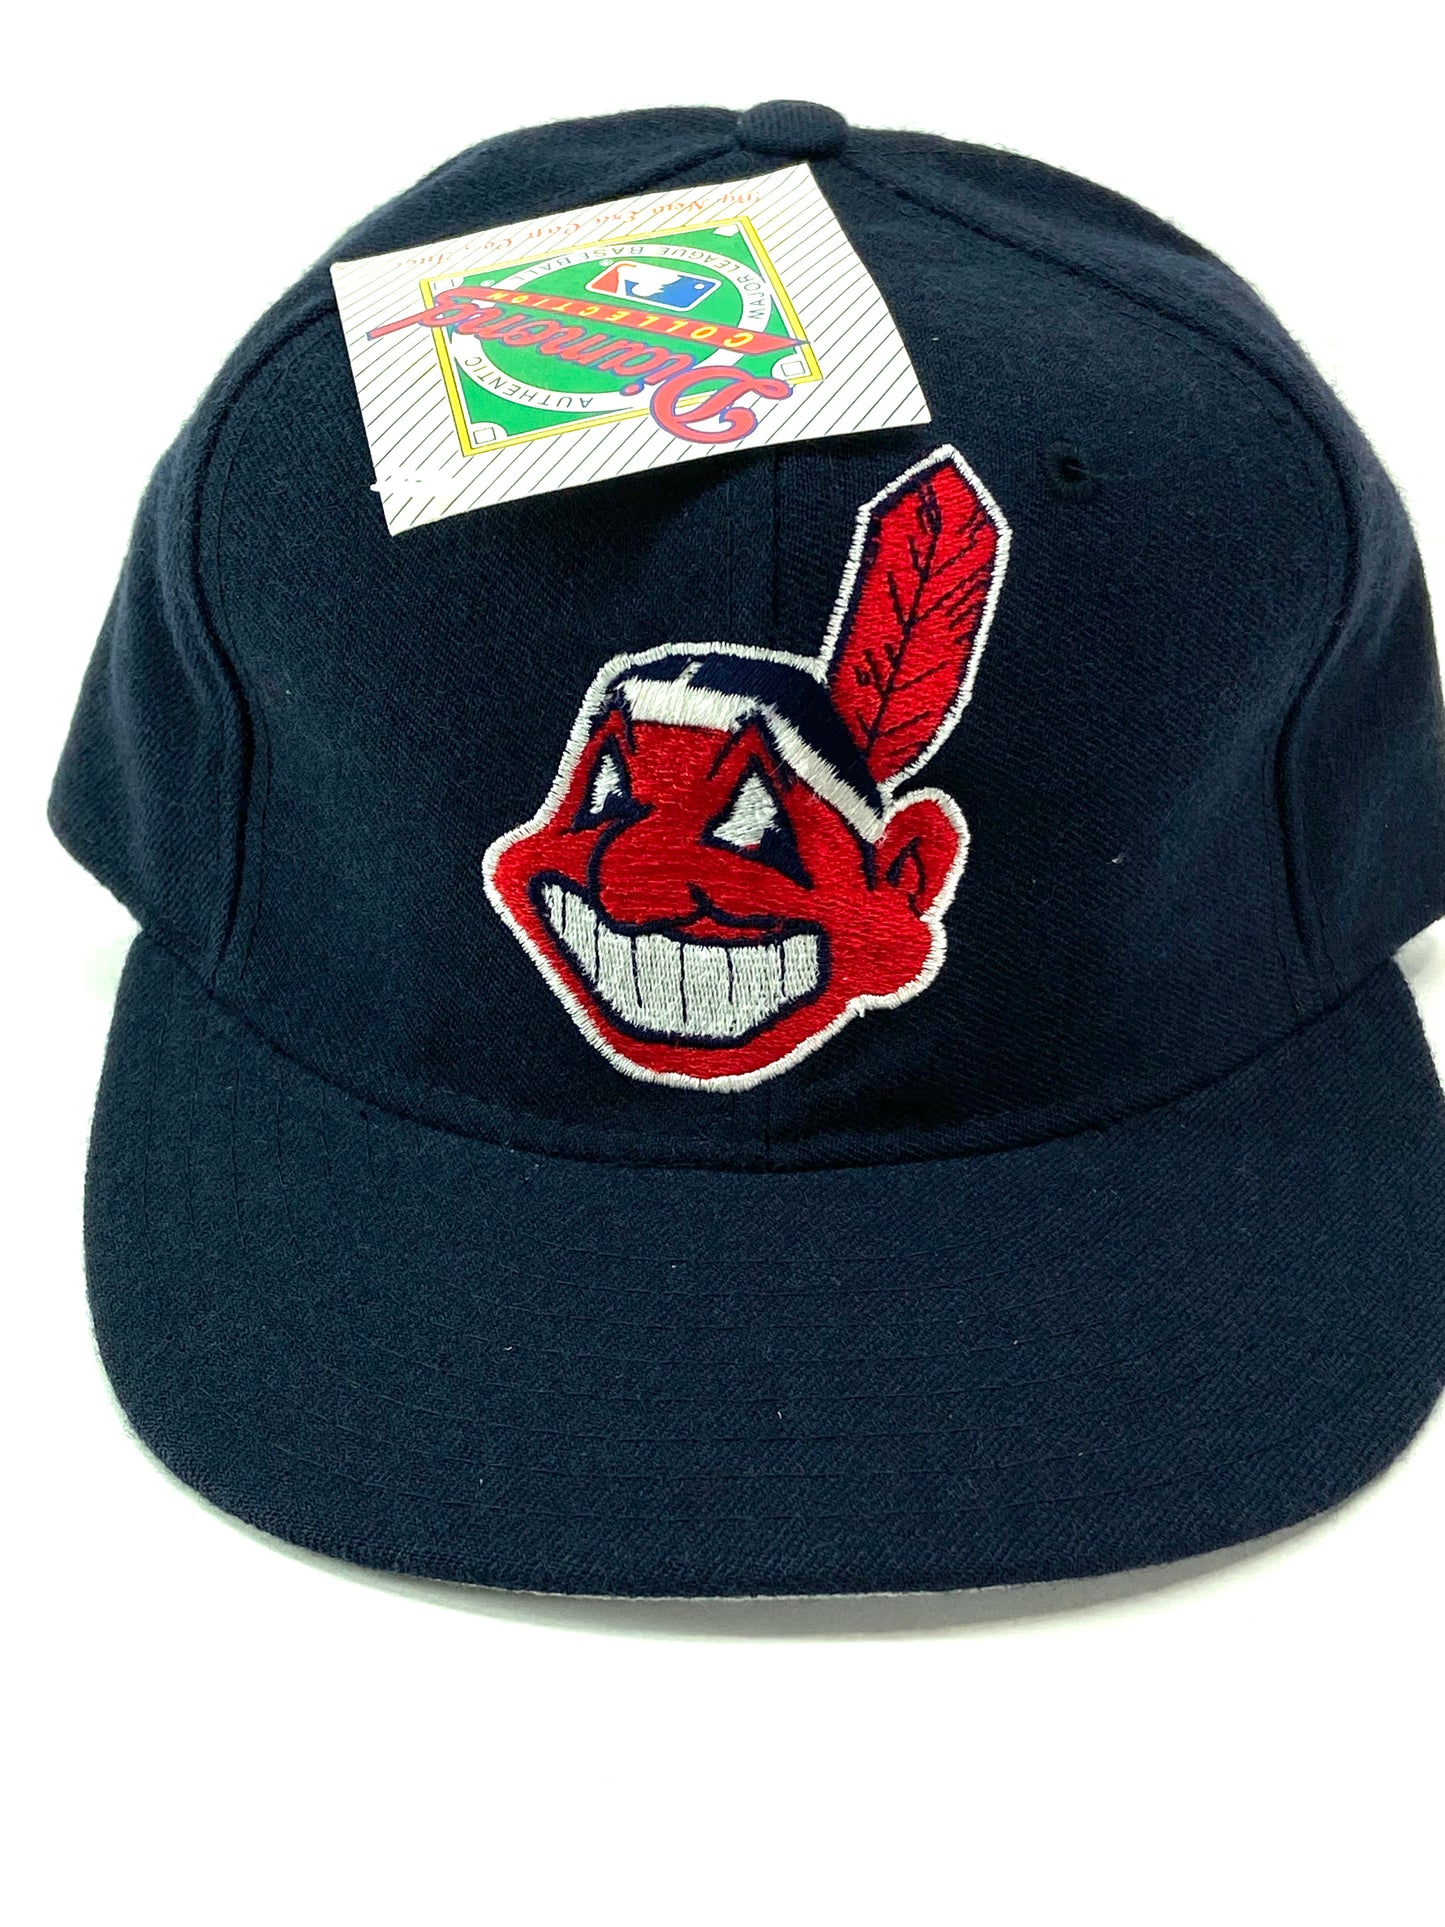 Cleveland Indians Vintage MLB Fitted 100% Wool Hat By New Era